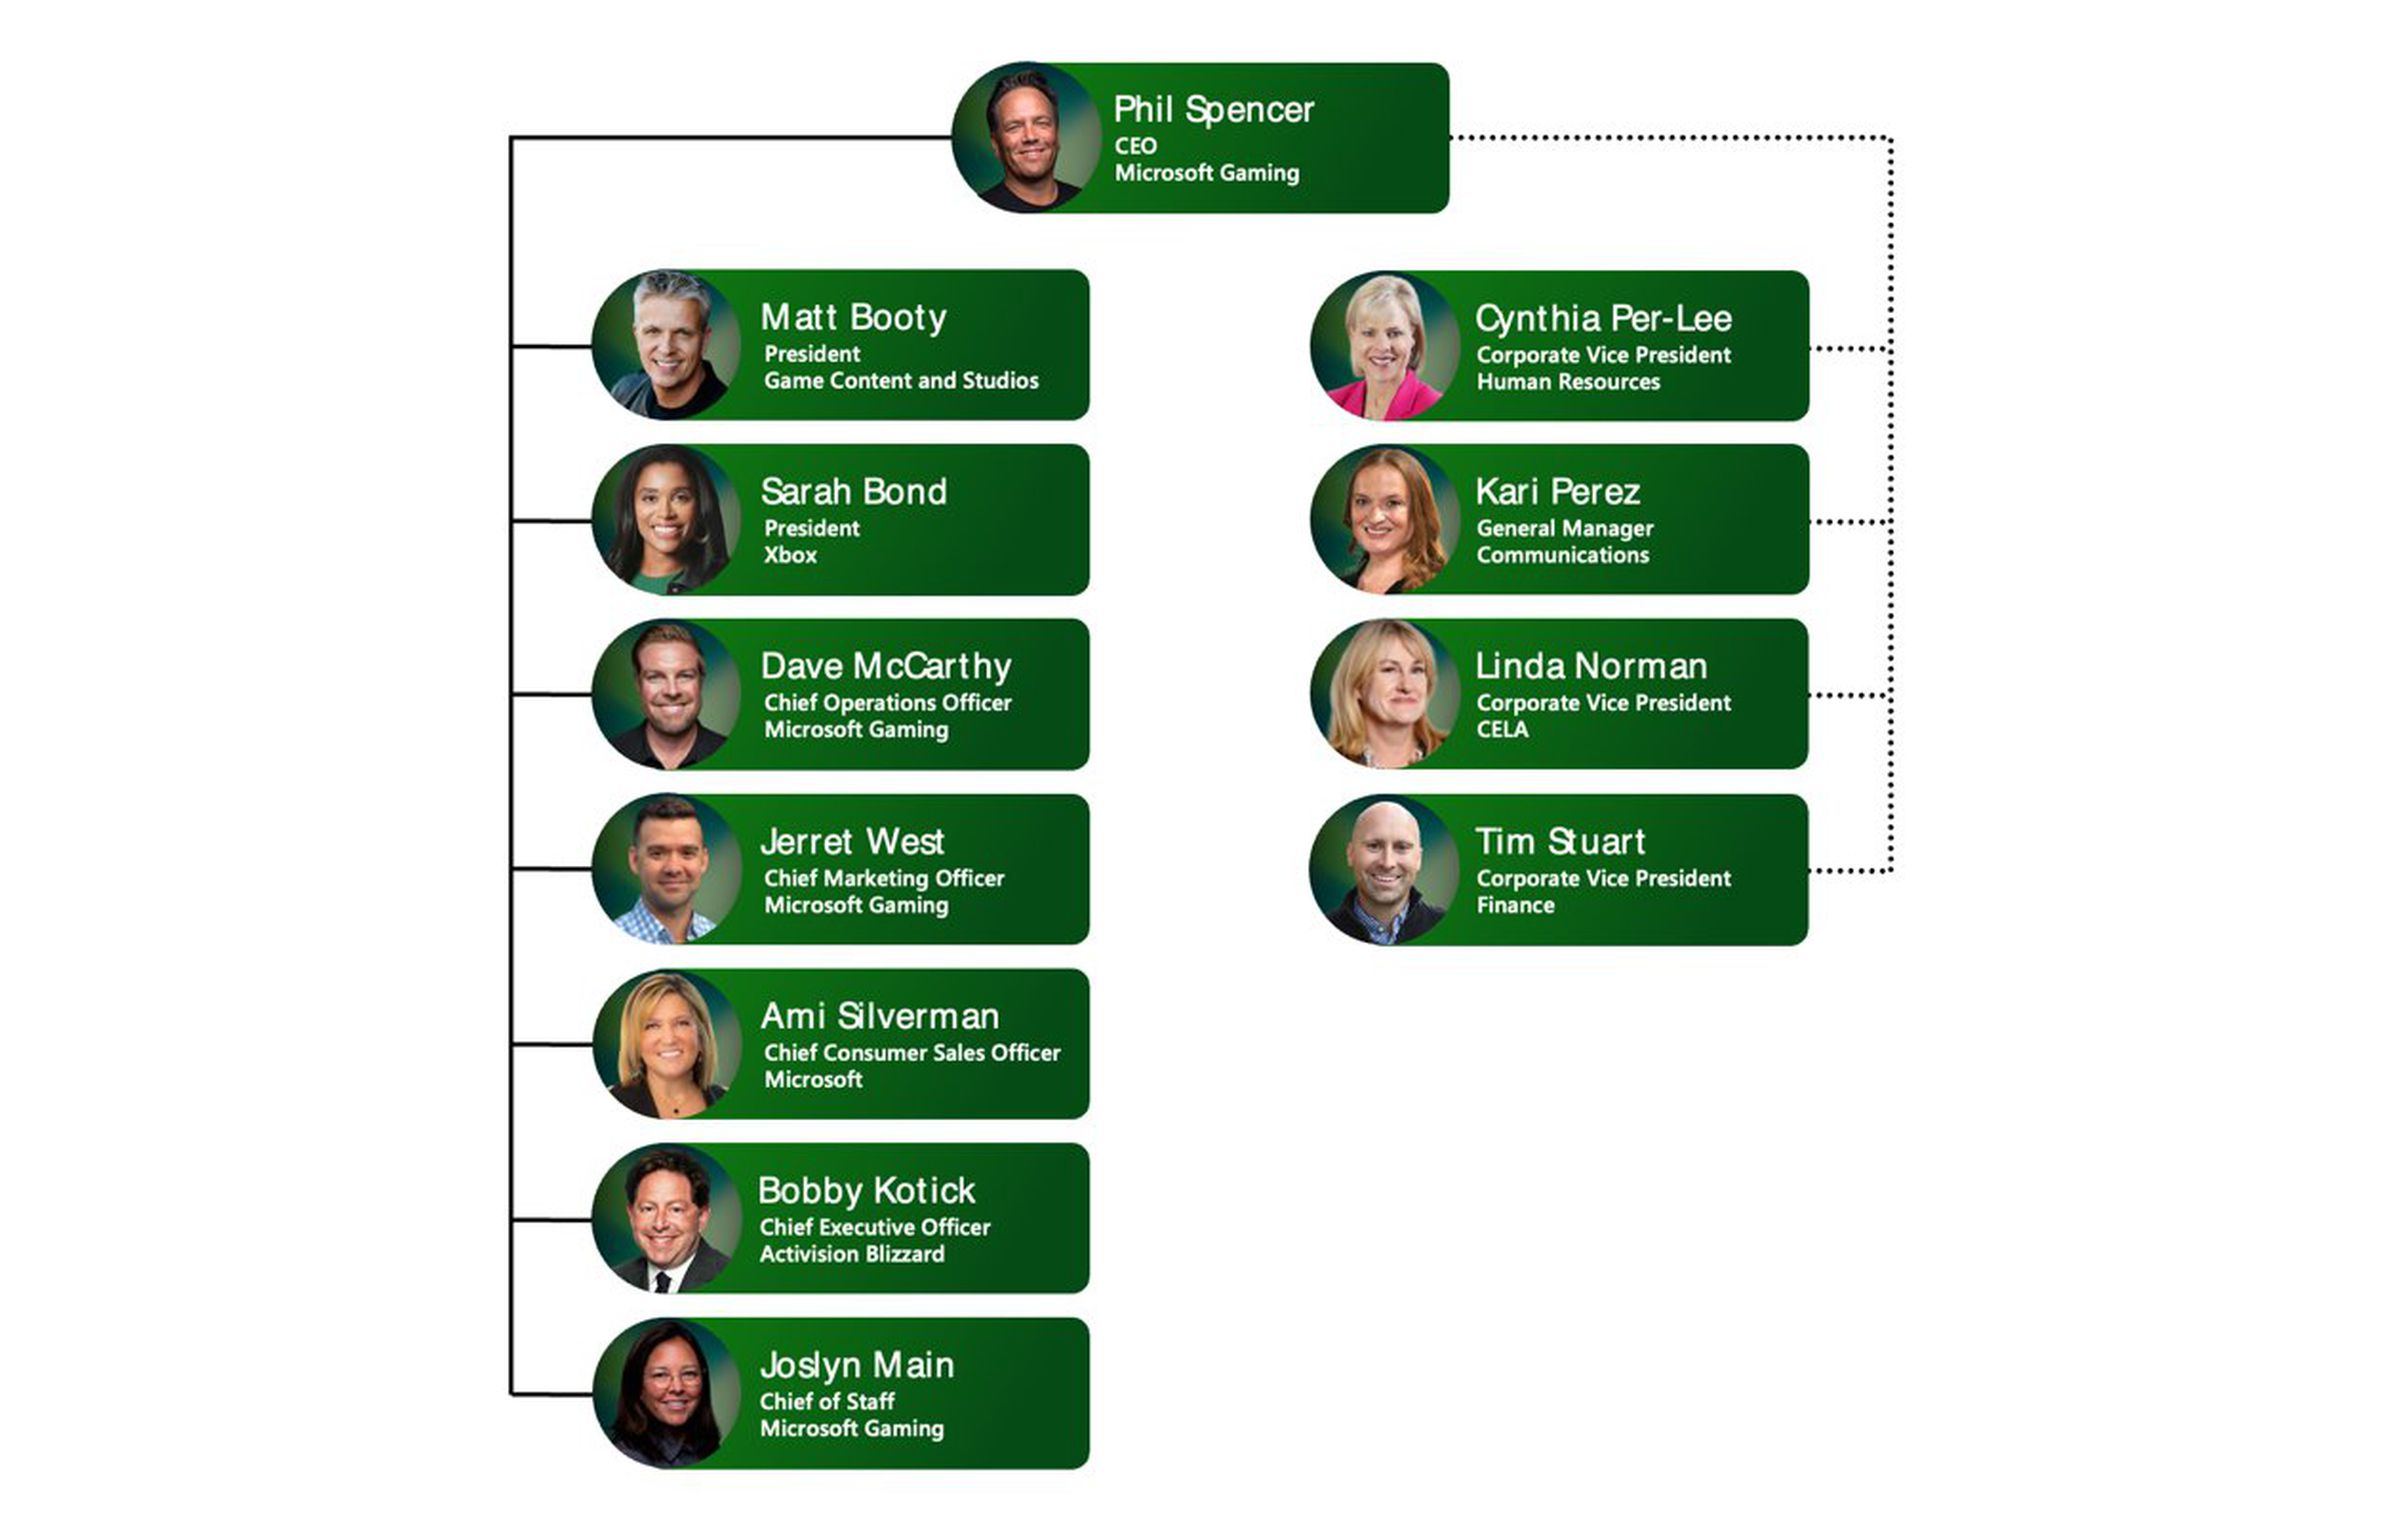 Organizational tree showing Phil Spencer as well as the other executives at Microsoft’s gaming business.